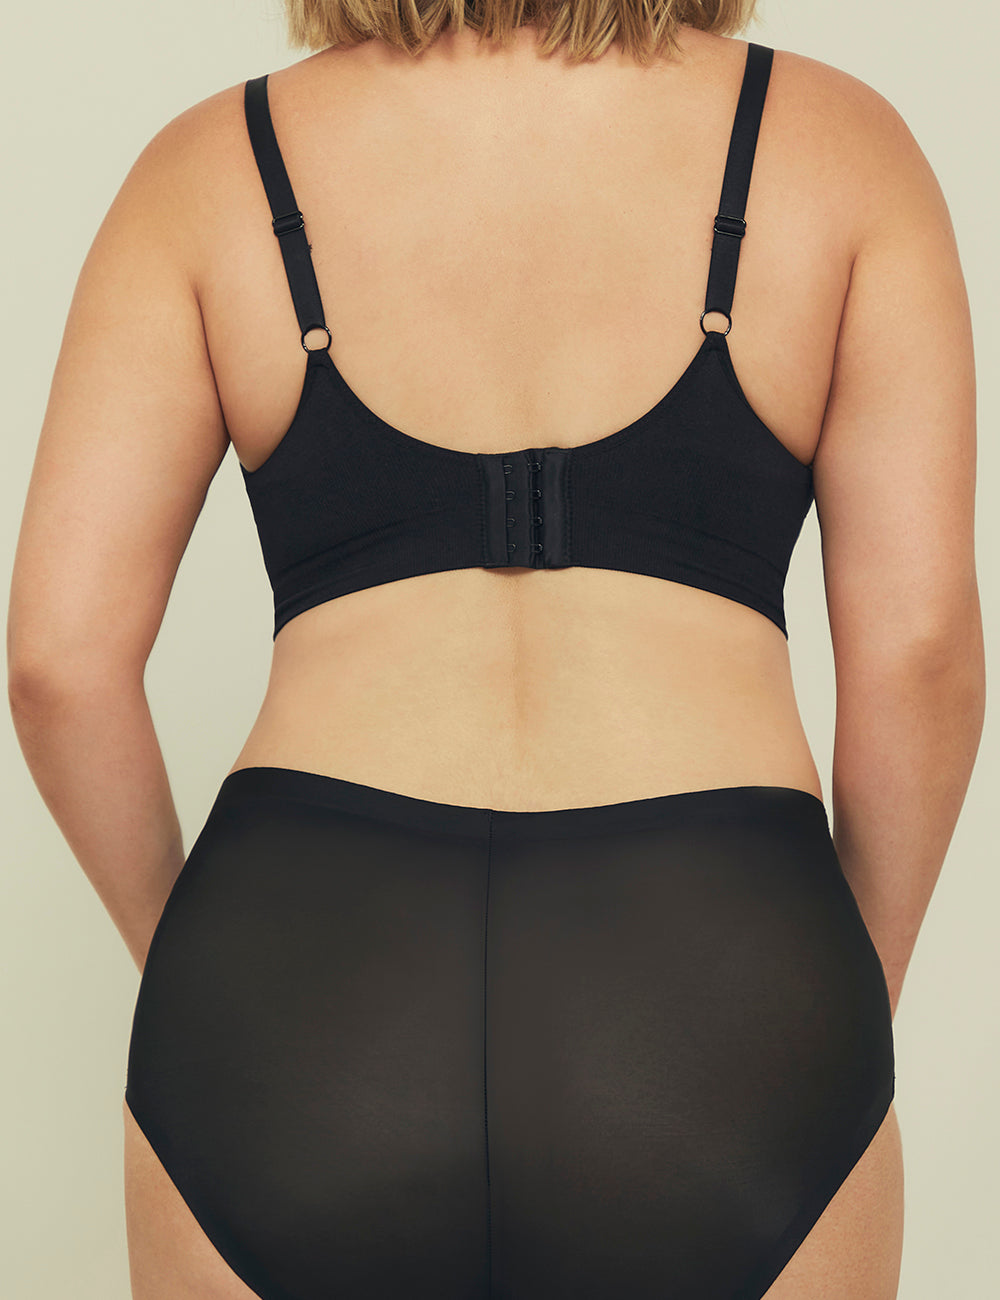 Curvesque Support Wirefree Bra